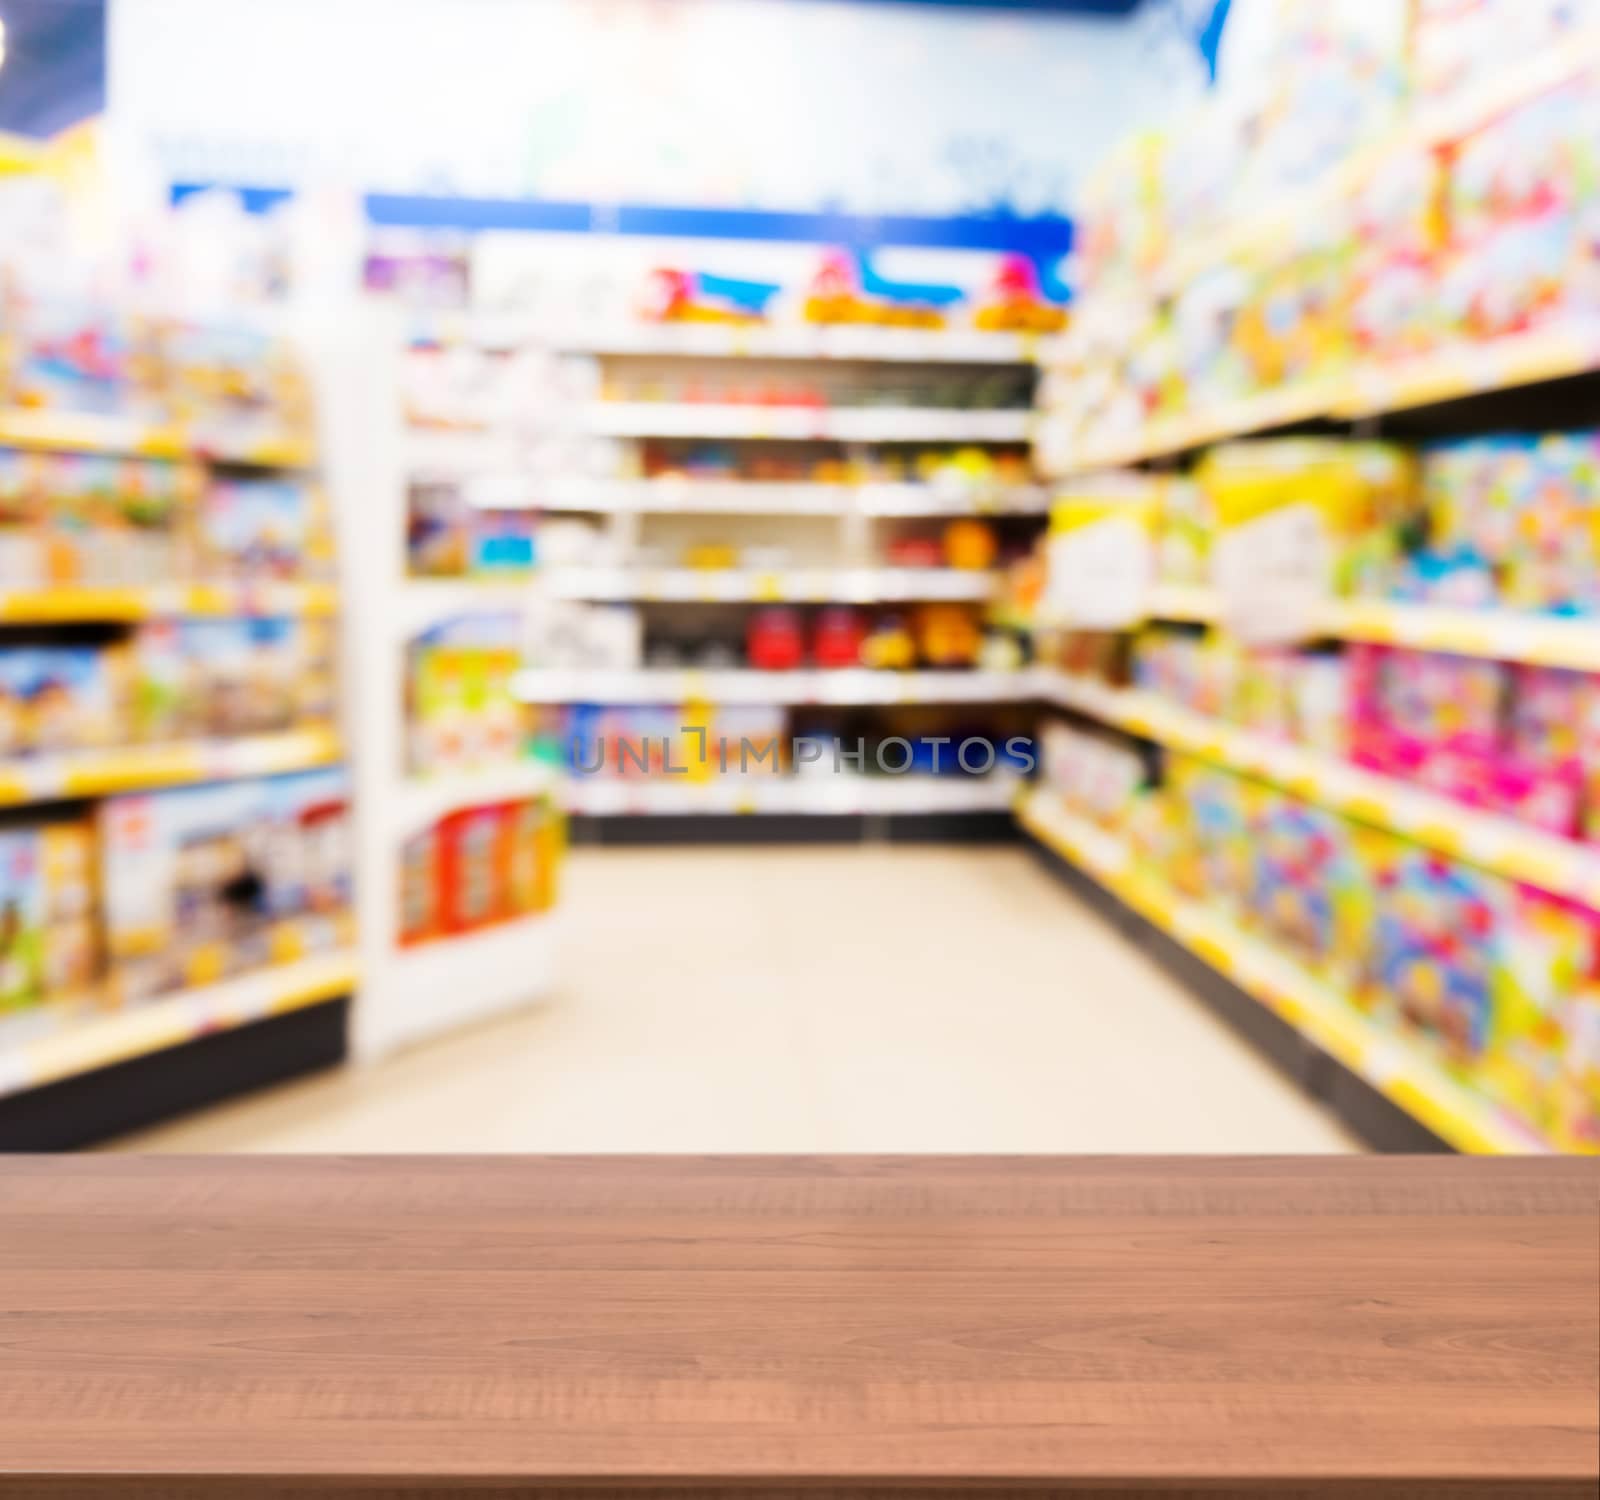 Wooden board empty table in front of blurred background. Perspective dark wood table over blur in kids toy store. Mock up for display or montage your product.